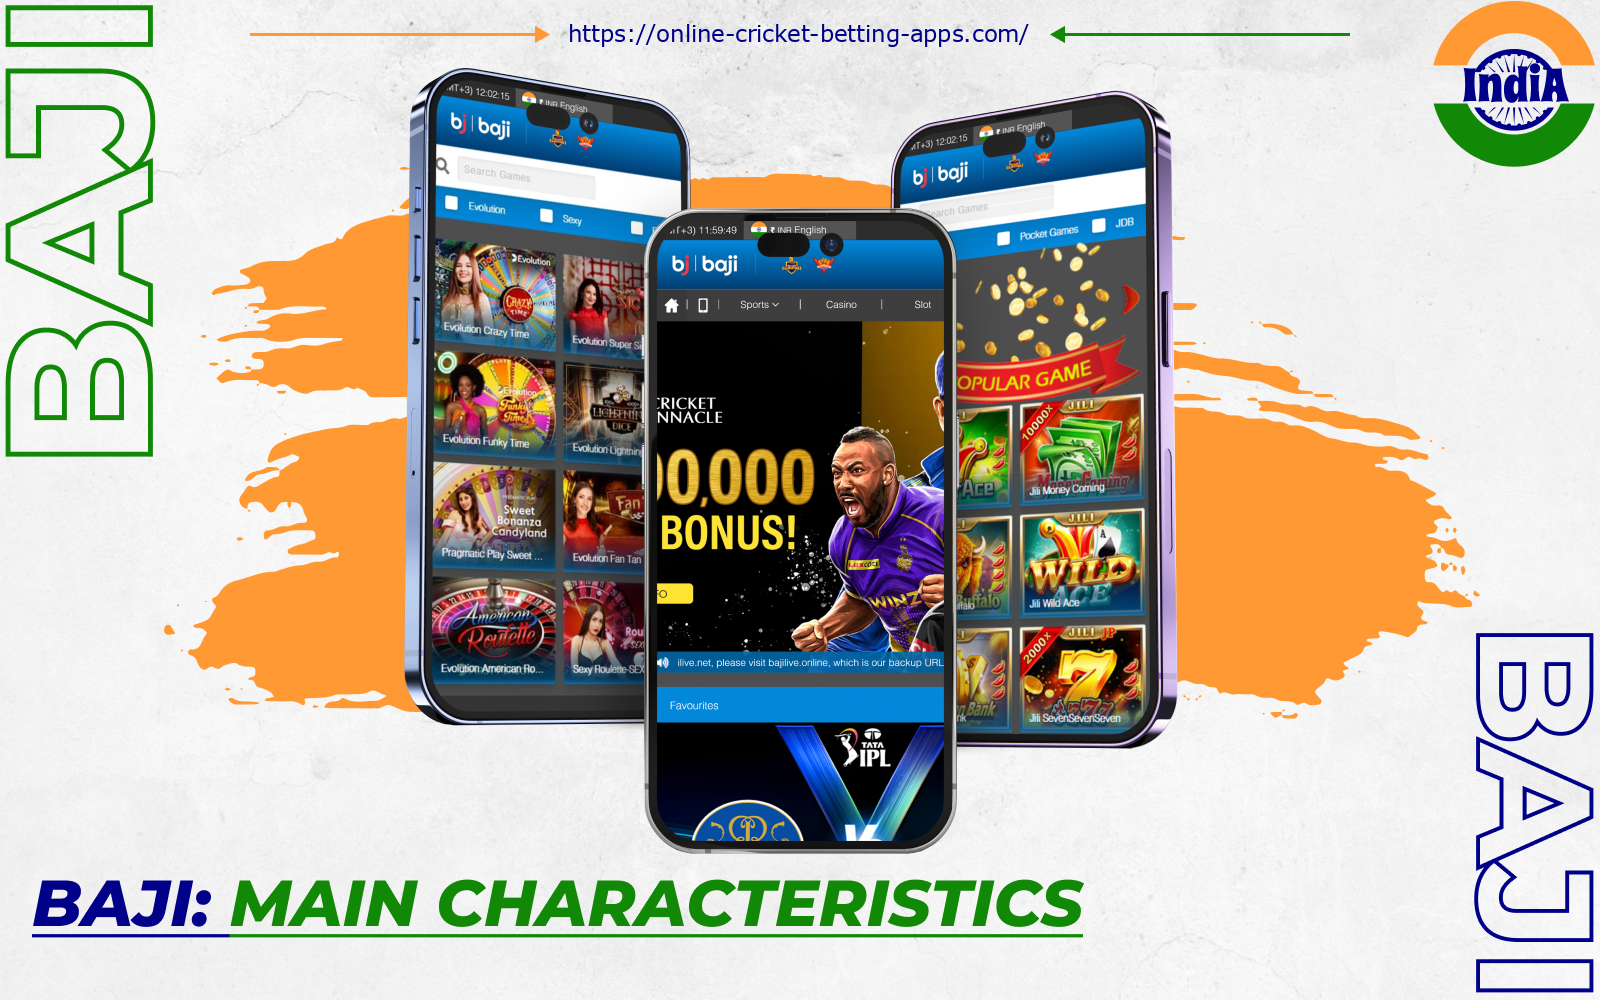 The Baji Live app is primarily a cricket and tennis betting exchange in India